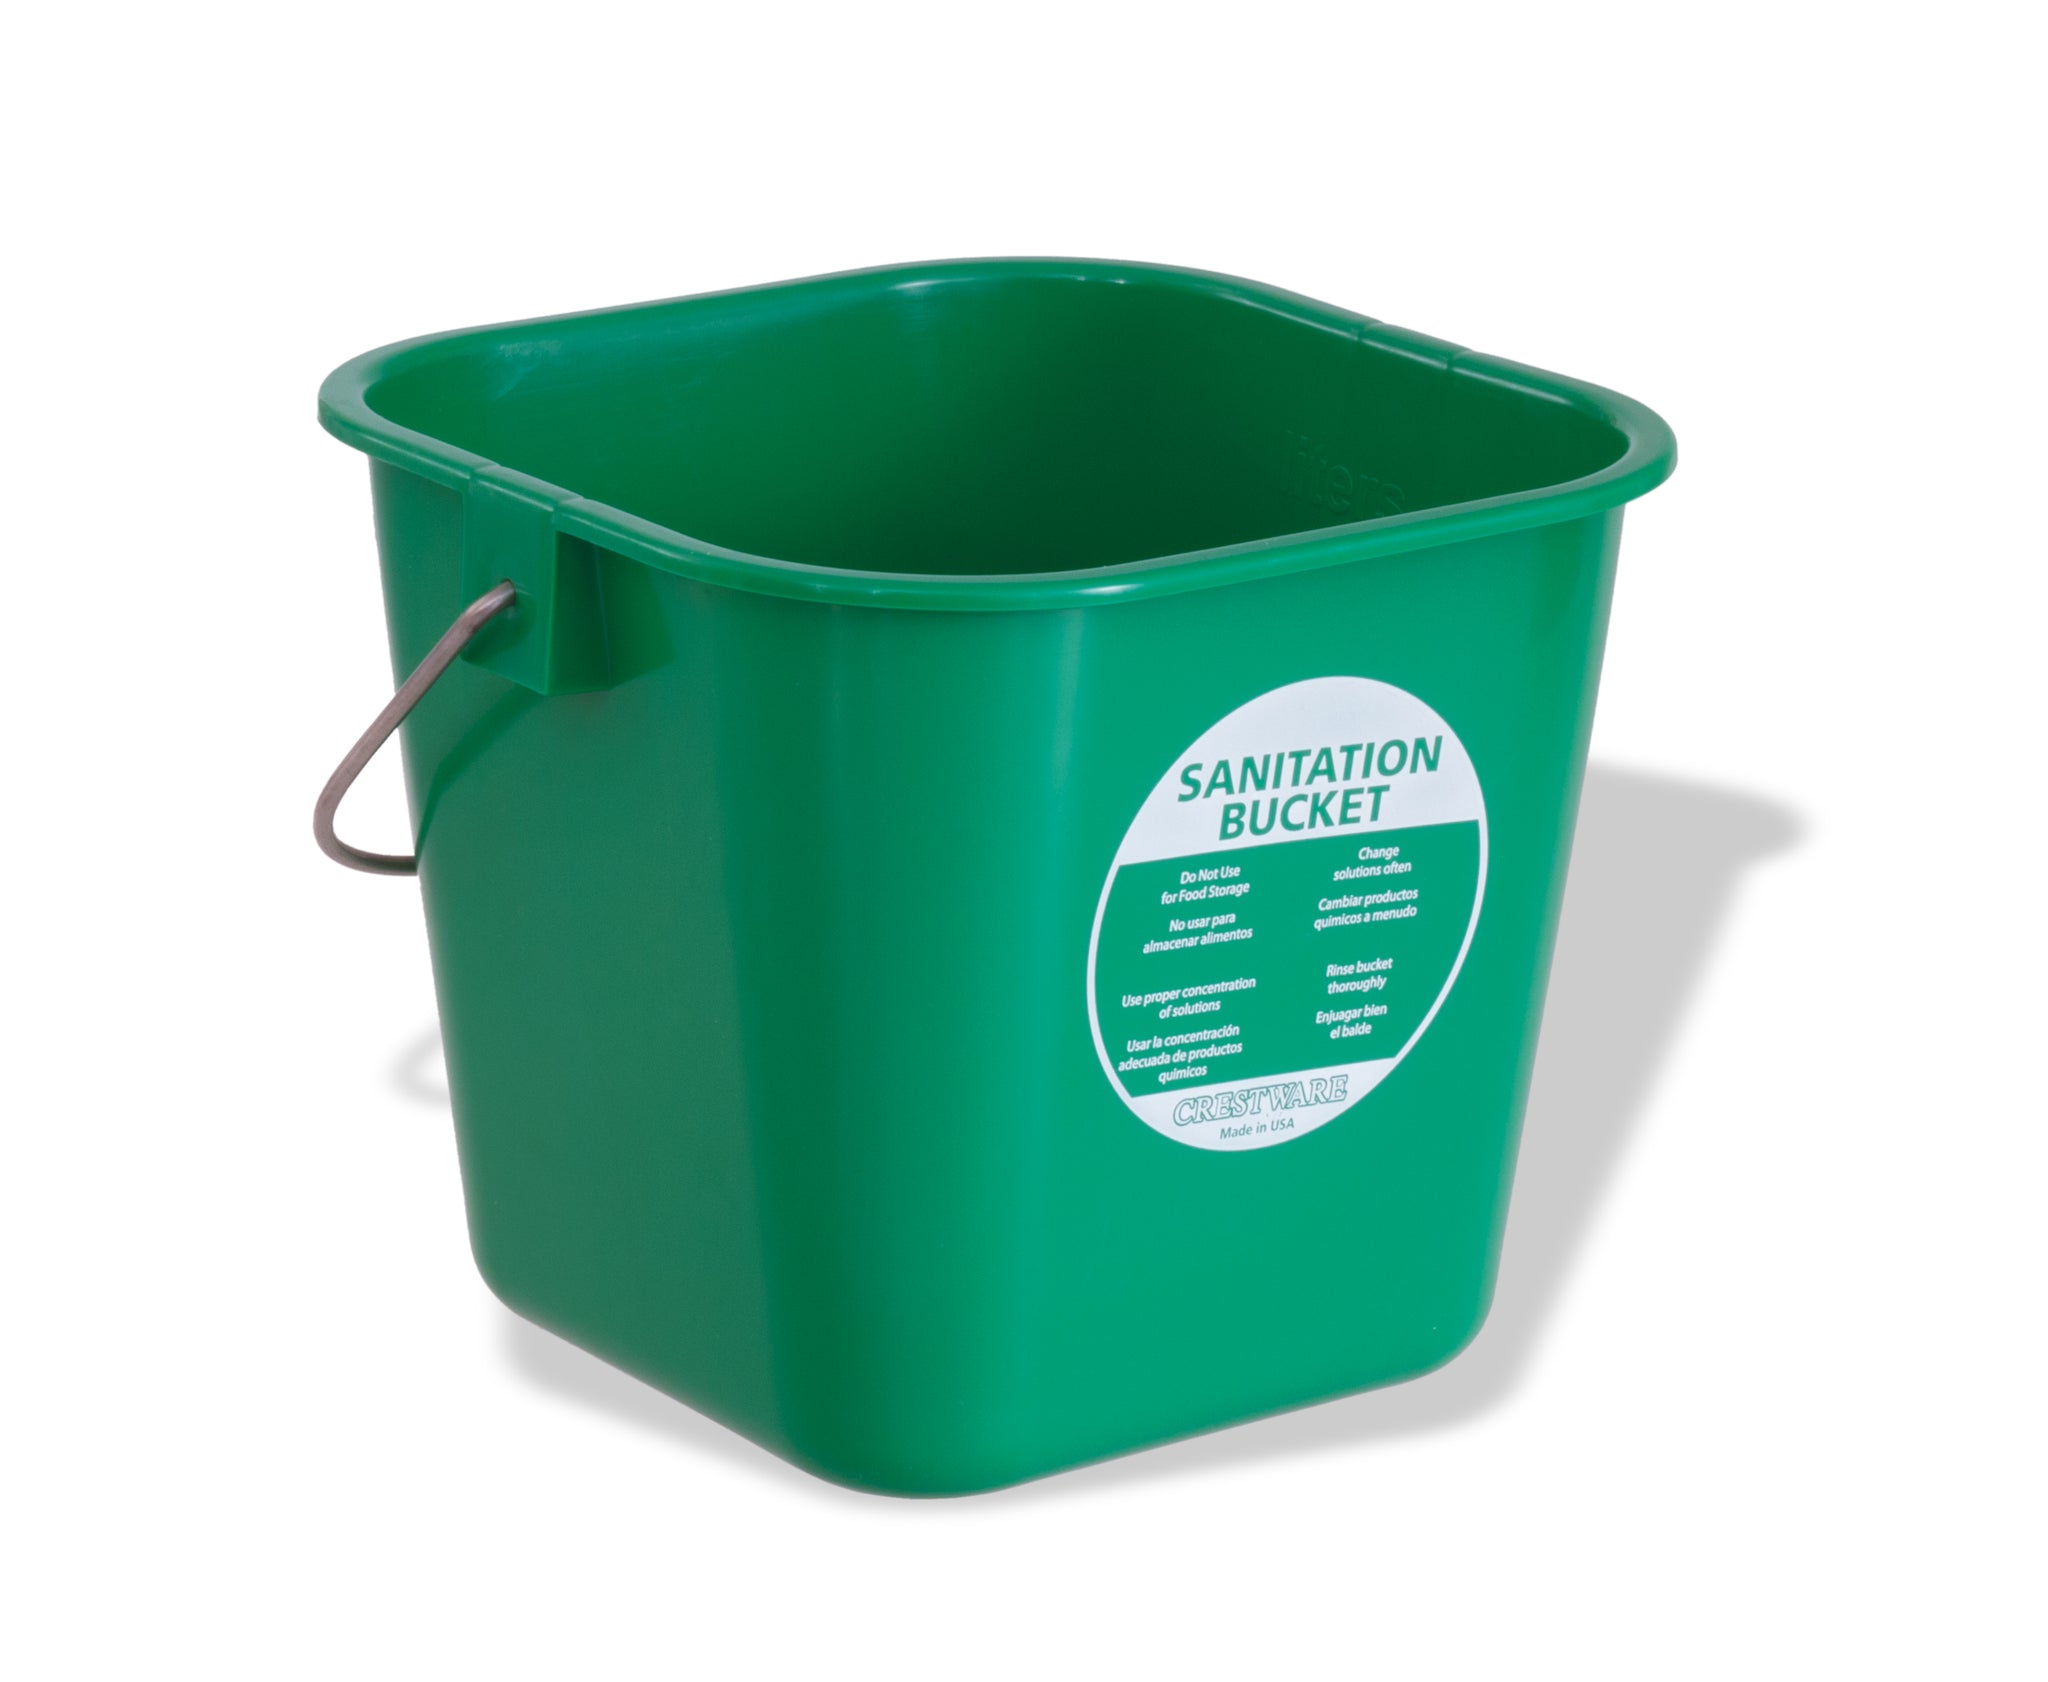 Cleaning and Sanitation Bucket